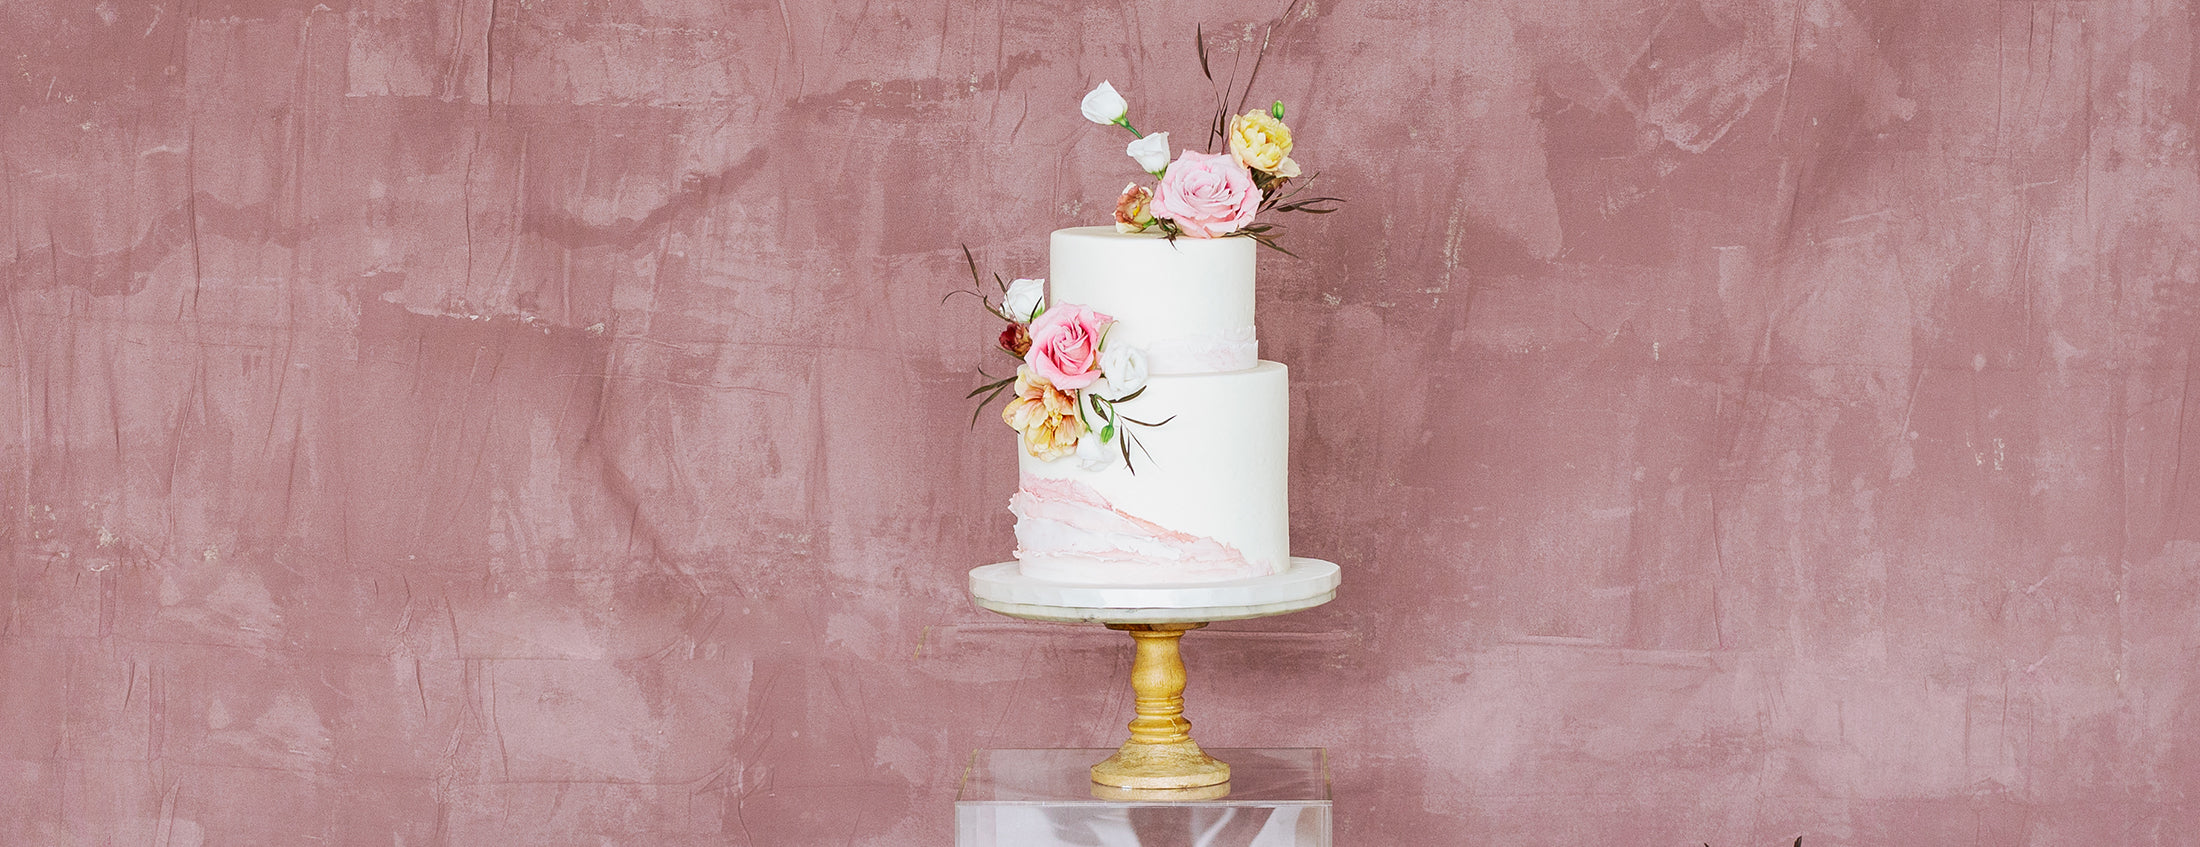 how to decorate a wedding cake with flowers